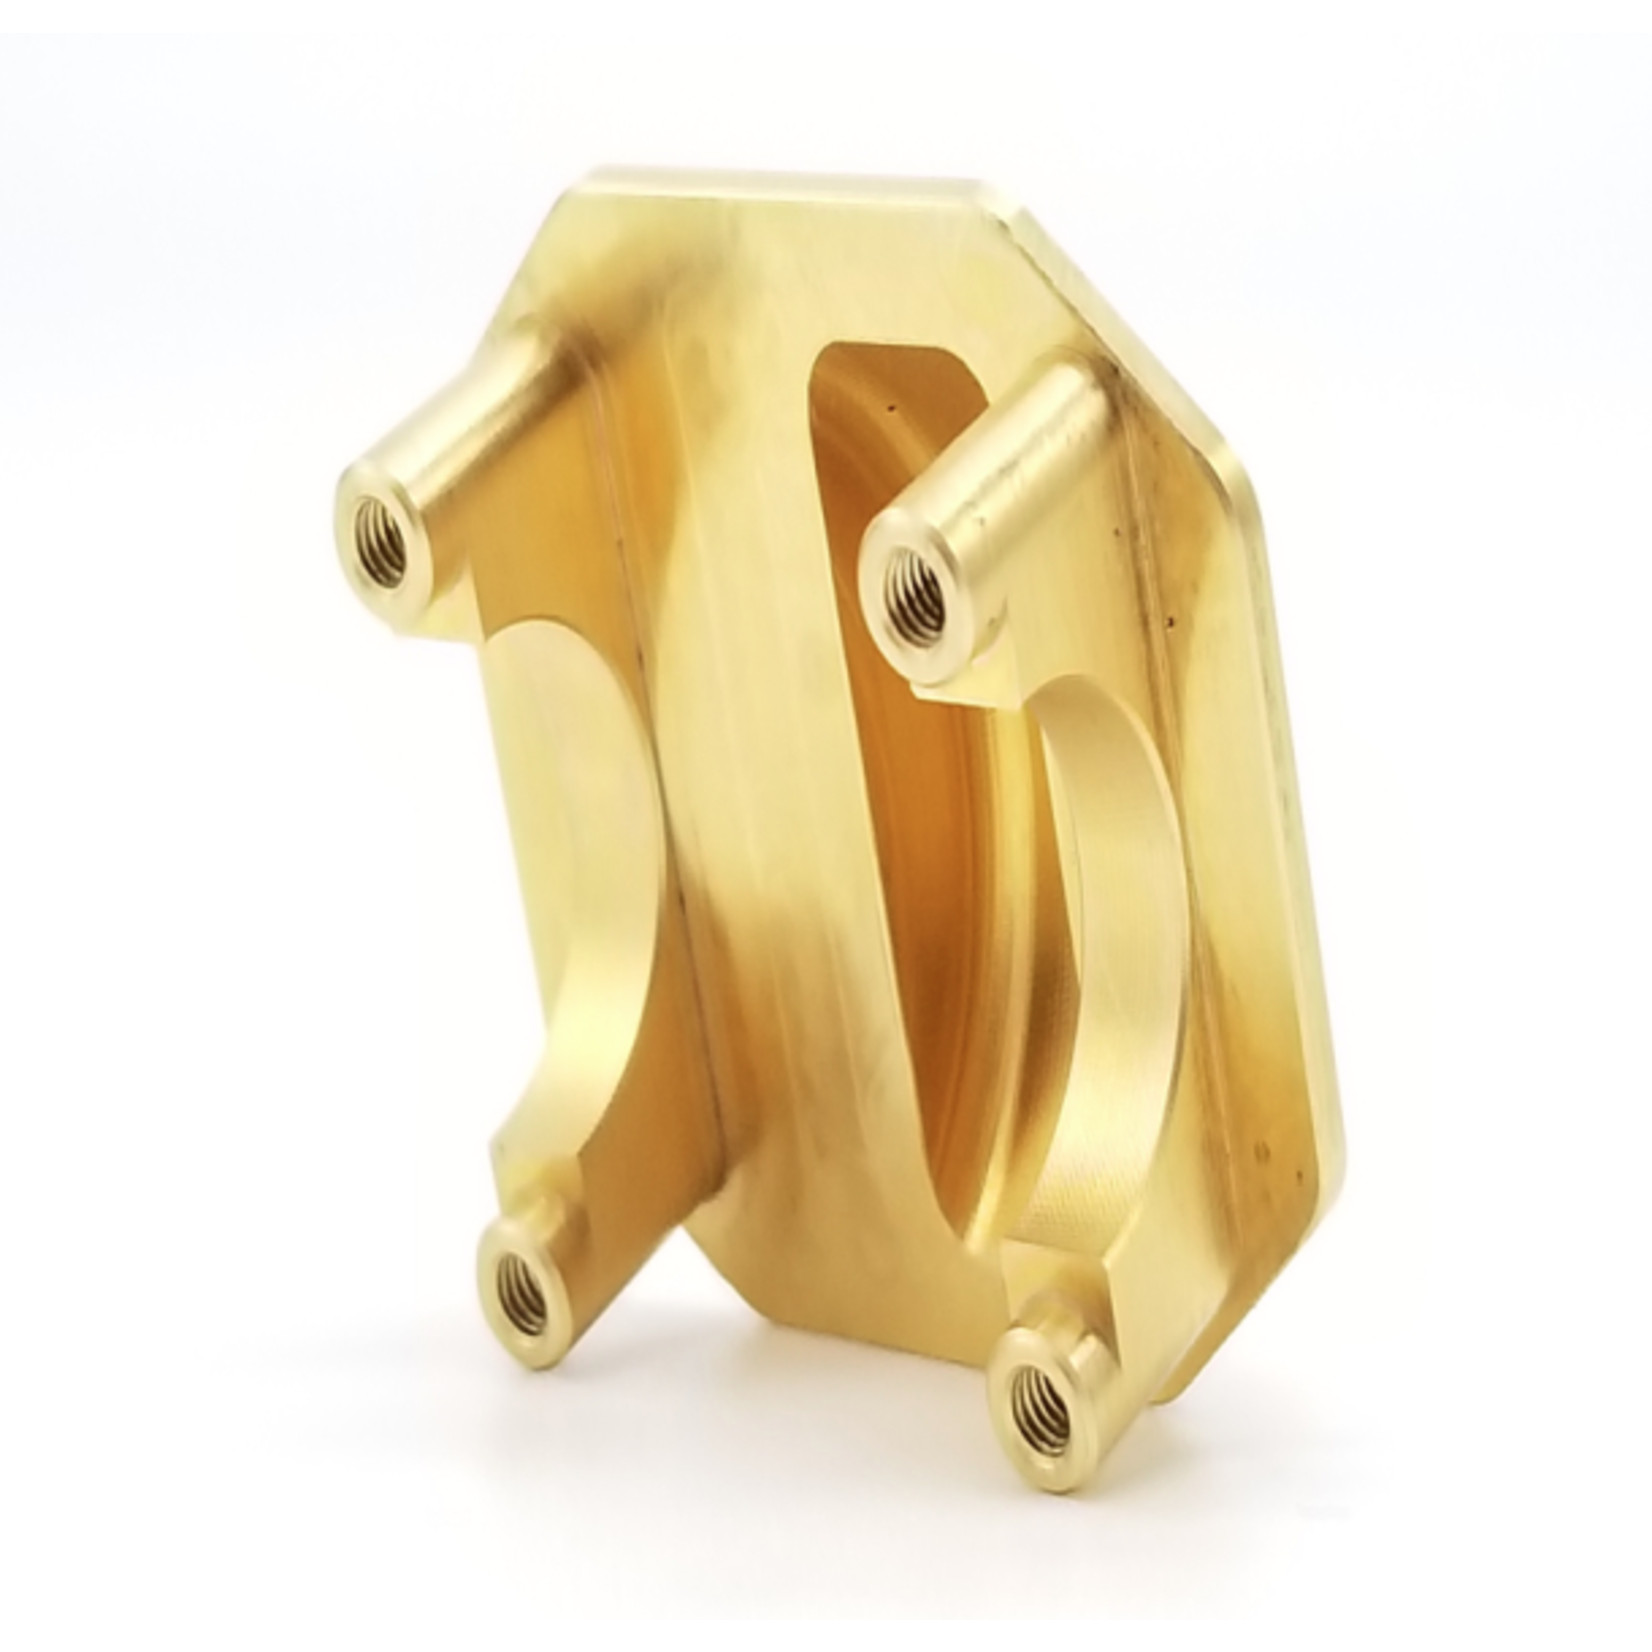 Beef Tubes Beef Tubes Element Differential Cover (Brass) #BT015DCB